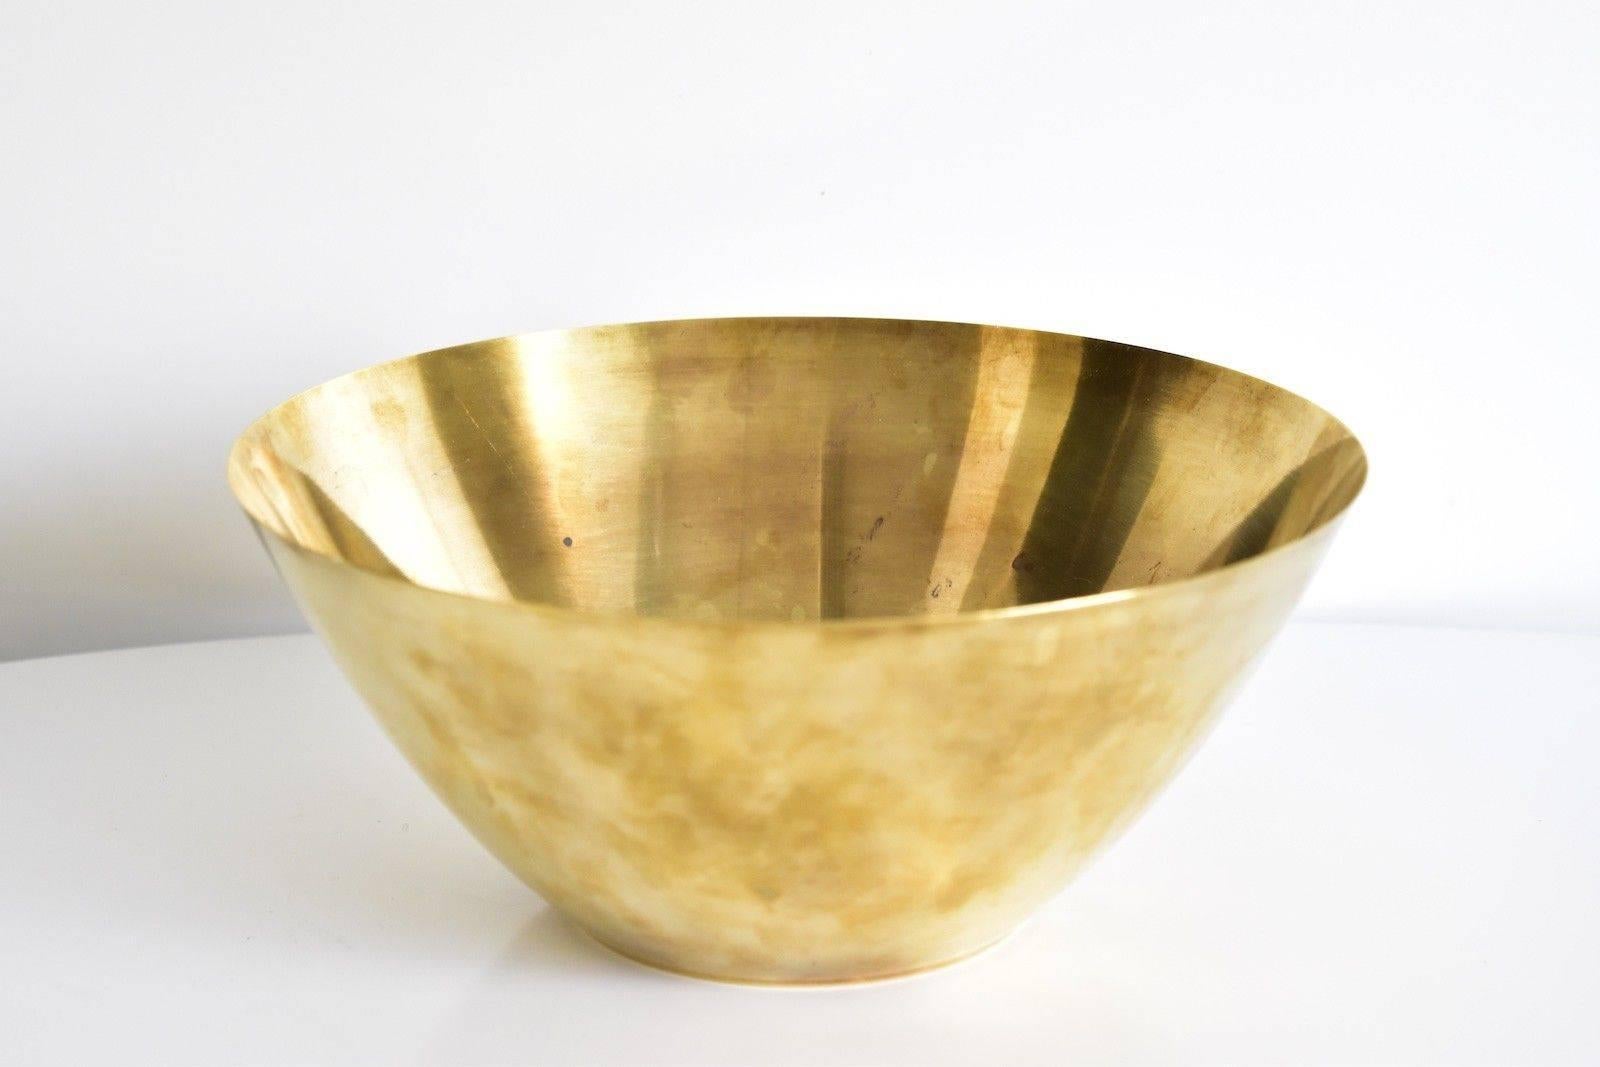 Ultra RAR Stelton brass bowl design by Arne Jacobsen for the SAS Hotel in Copenhagen Denmark in very nice vintage condition without any damages.